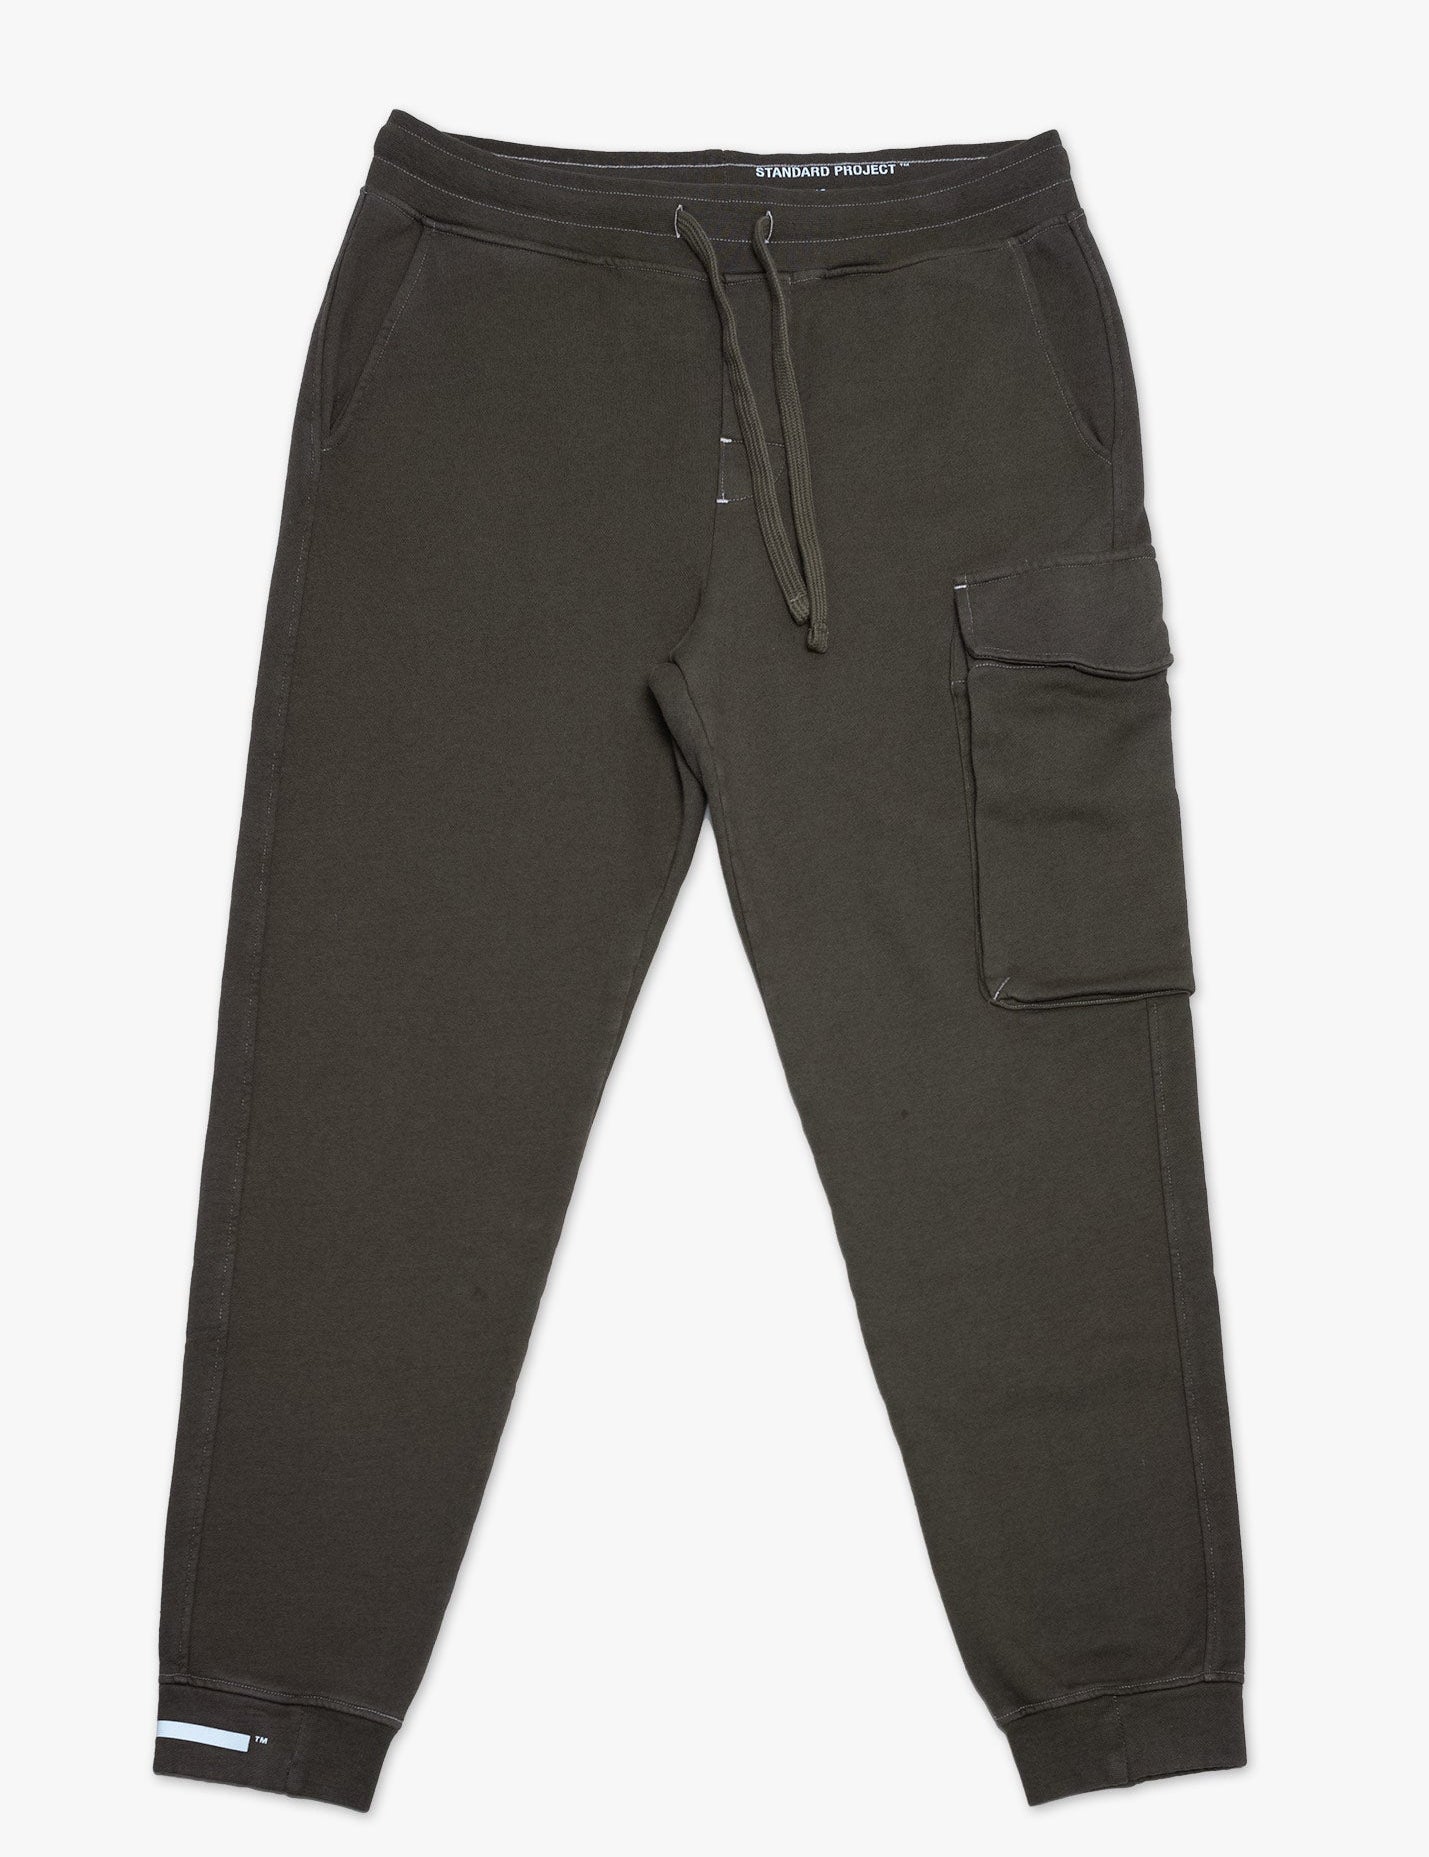 ITEM No. 13 – Track Pant Olive Overdyed - Standard Project